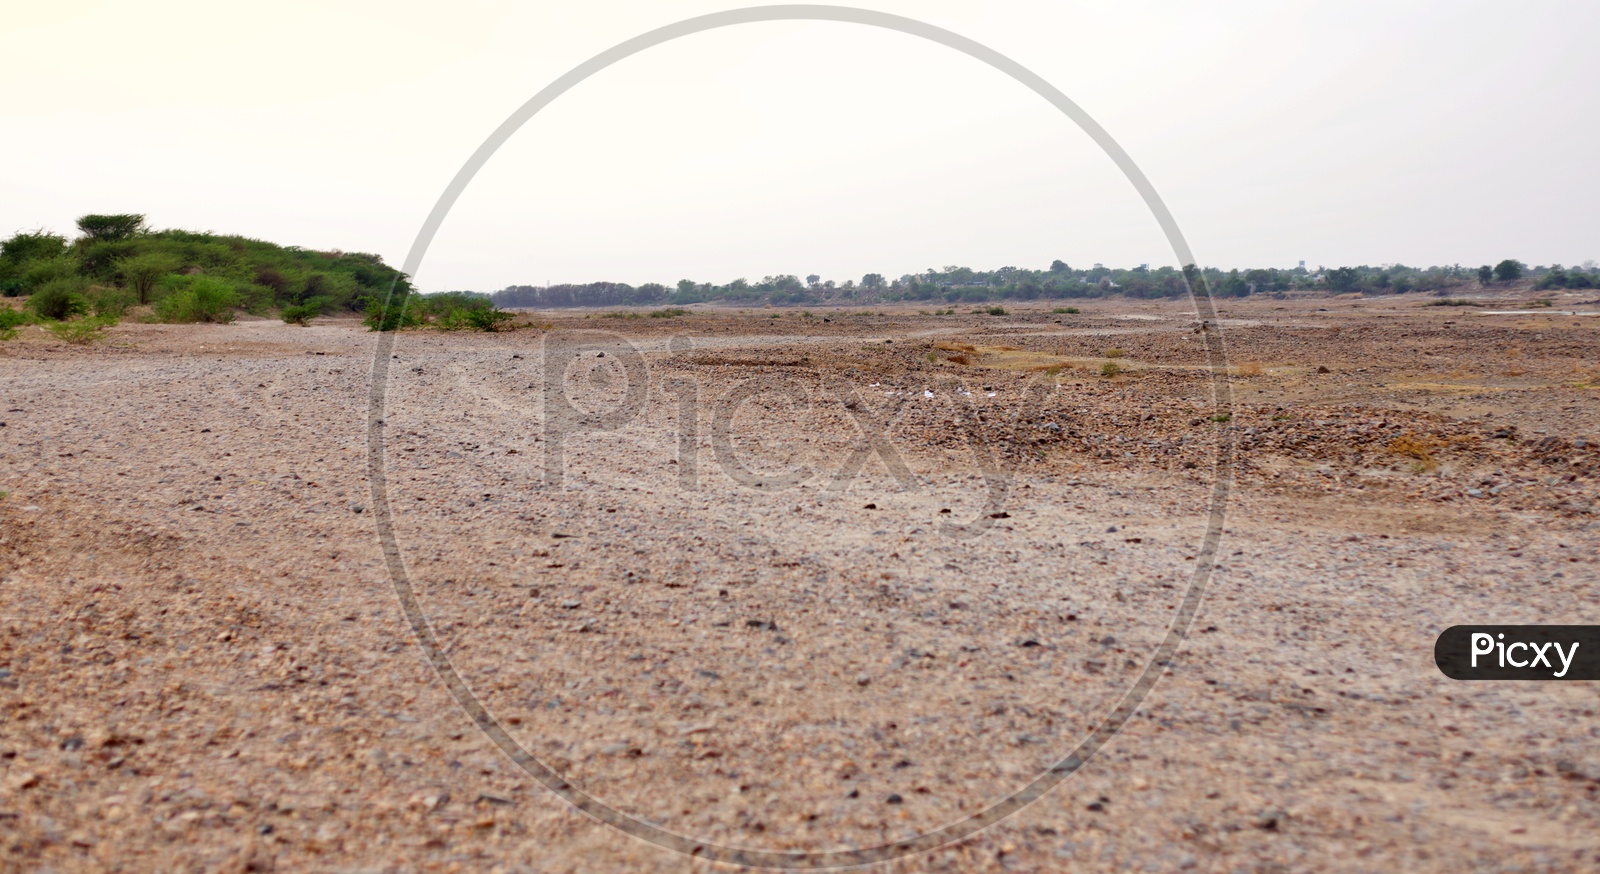 Tungabhadra river fully dried due to hot summers.